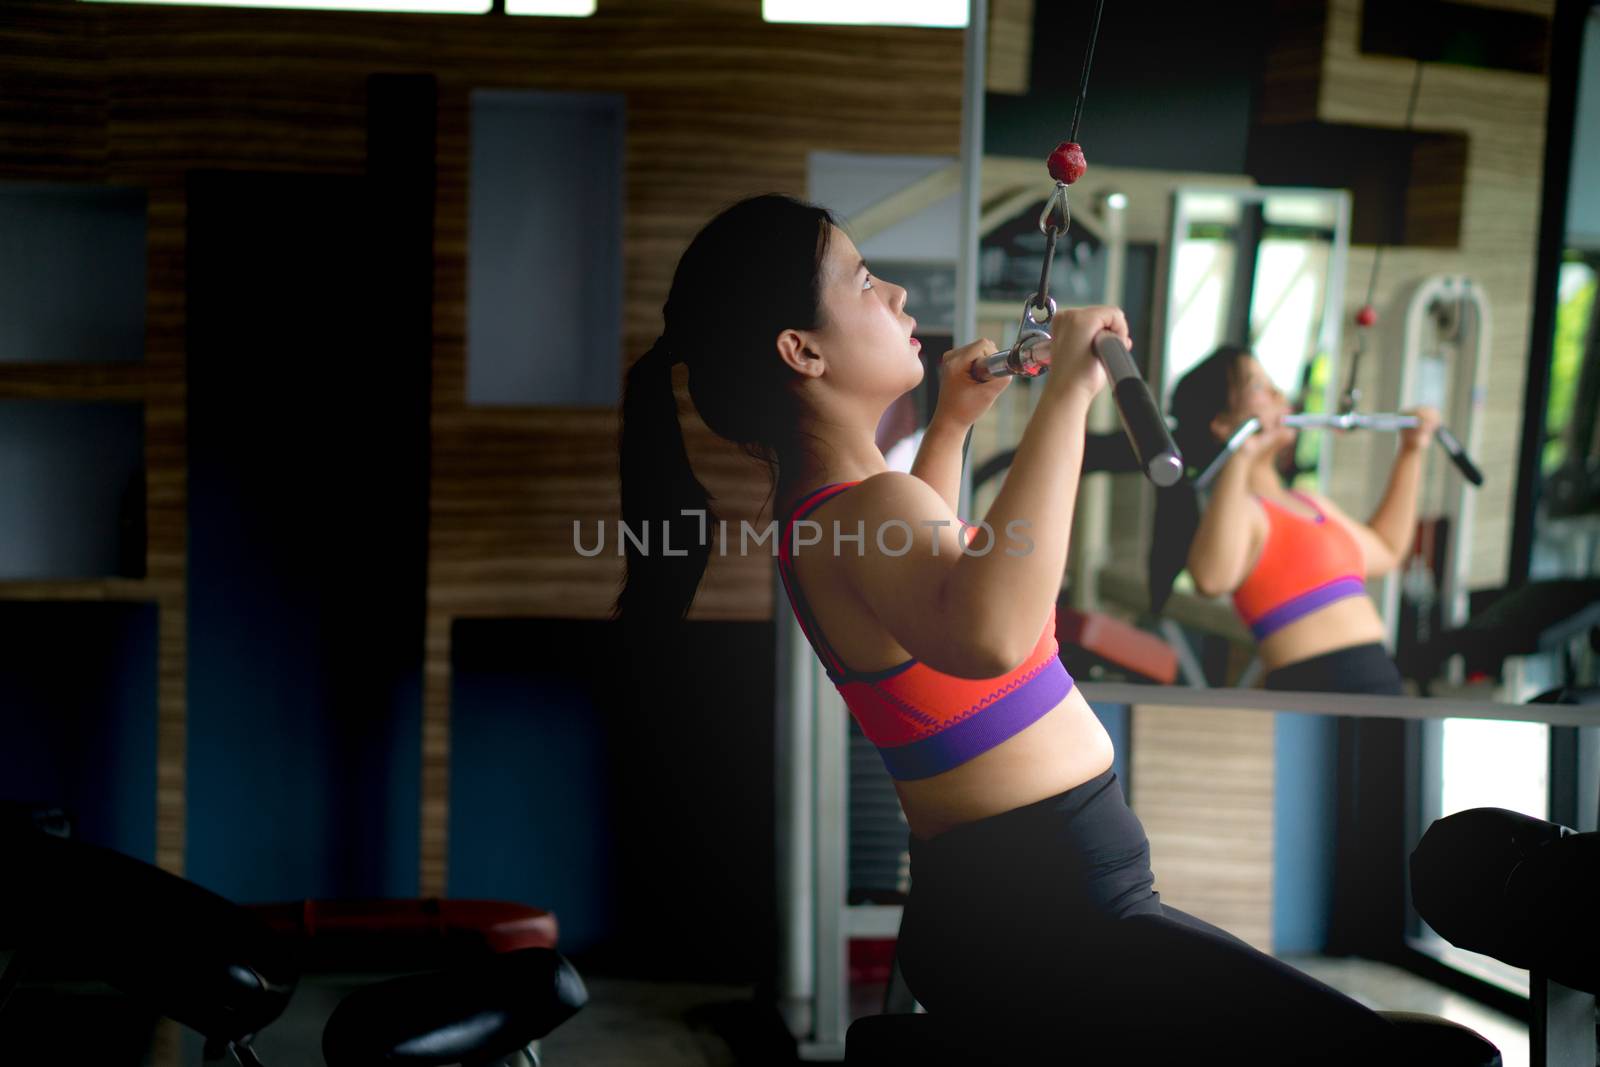 Asian beauty woman doing exercise for back. Working out on a lat pulldown machine. Diet, weight loss, slim body, healthy lifestyle concept.